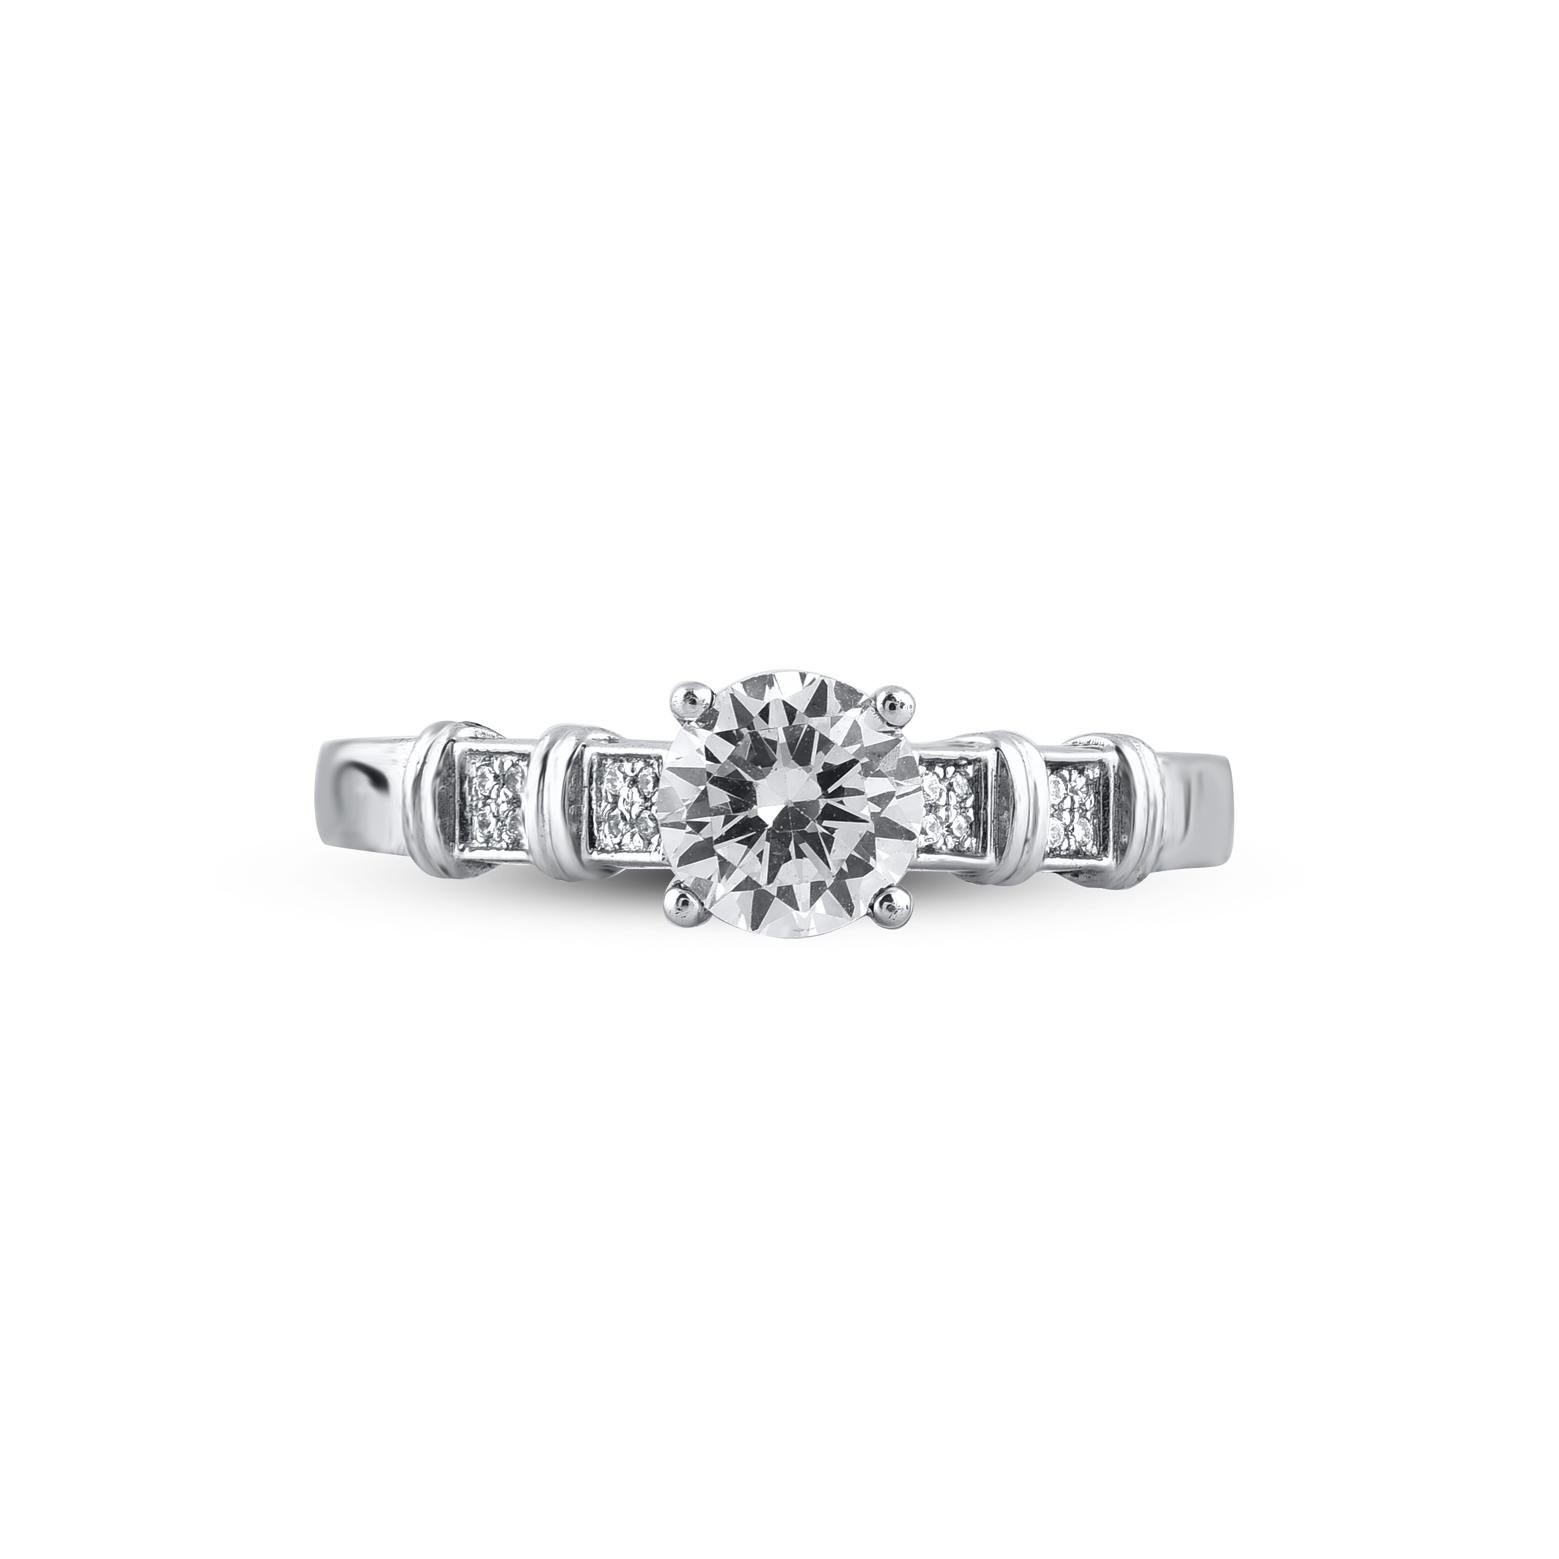 A sweet symbol of your everlasting romance, expertly crafted in 14 Karat white gold and shines with 17 single cut and brilliant cut diamond in prong and pave setting. The total weight of diamonds 0.75 carat, H-I color and I2 Clarity. This ring has